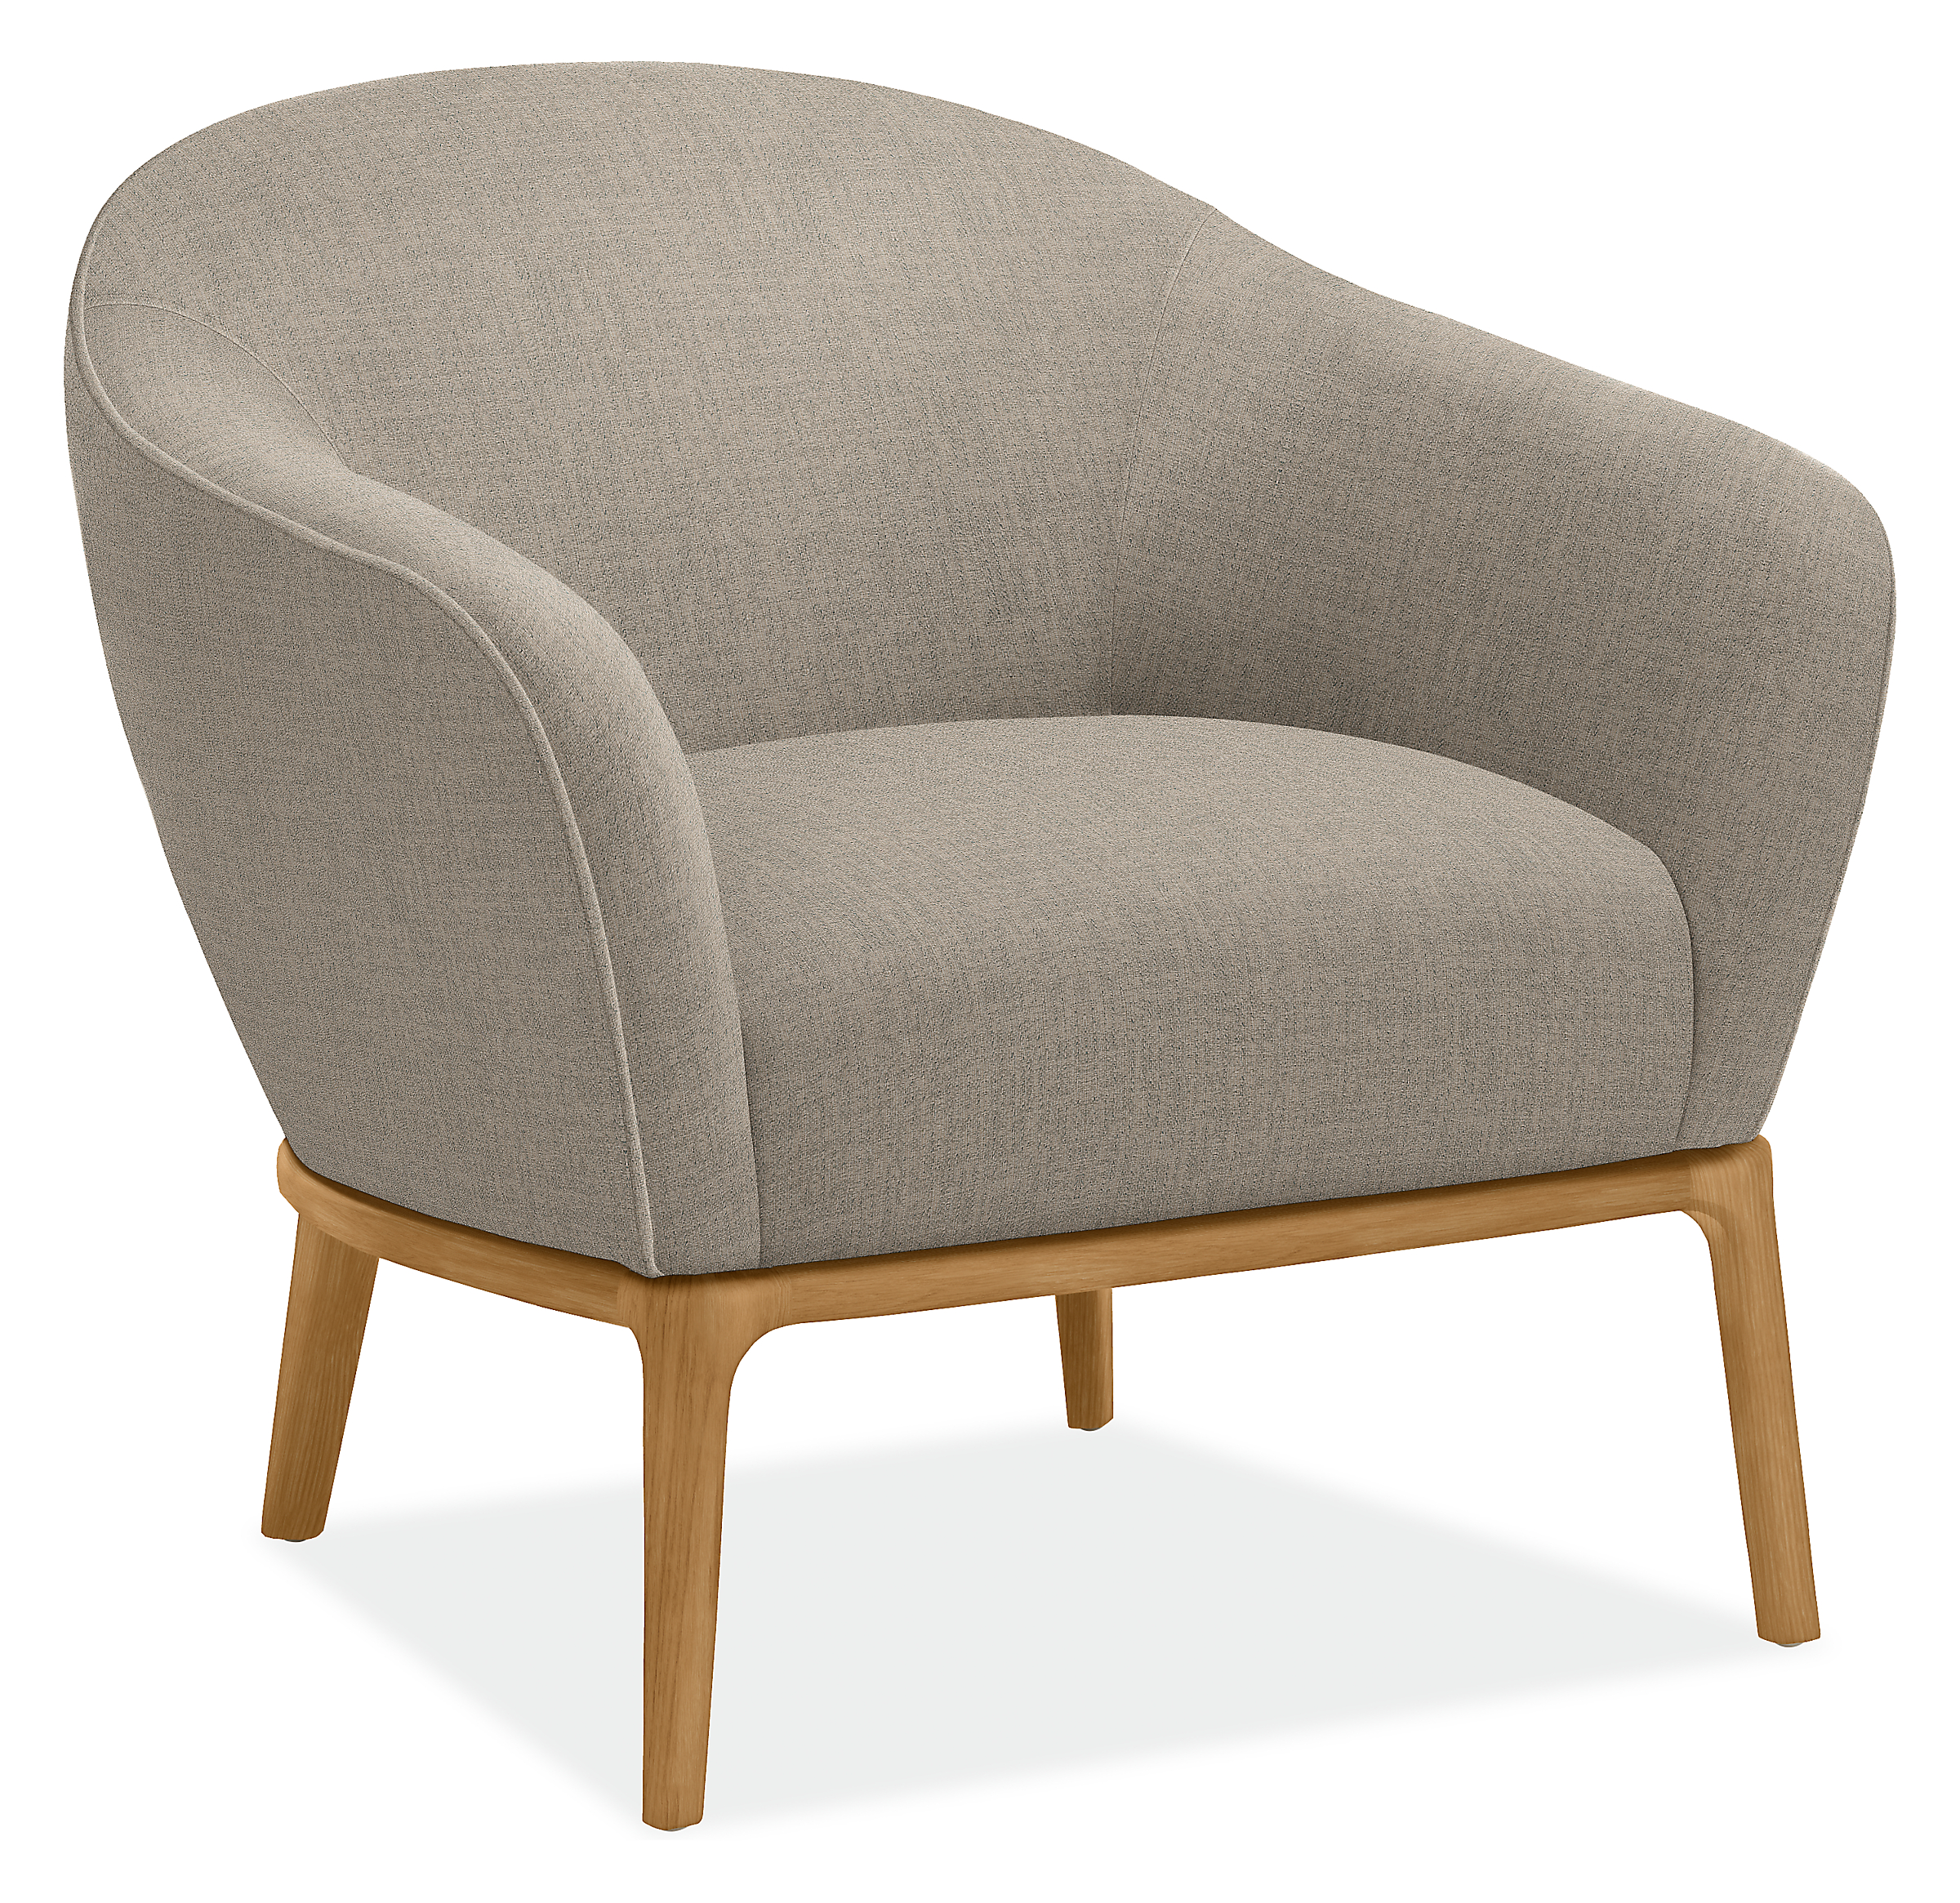 Sadie Chair in Etch Grey with White Oak Frame